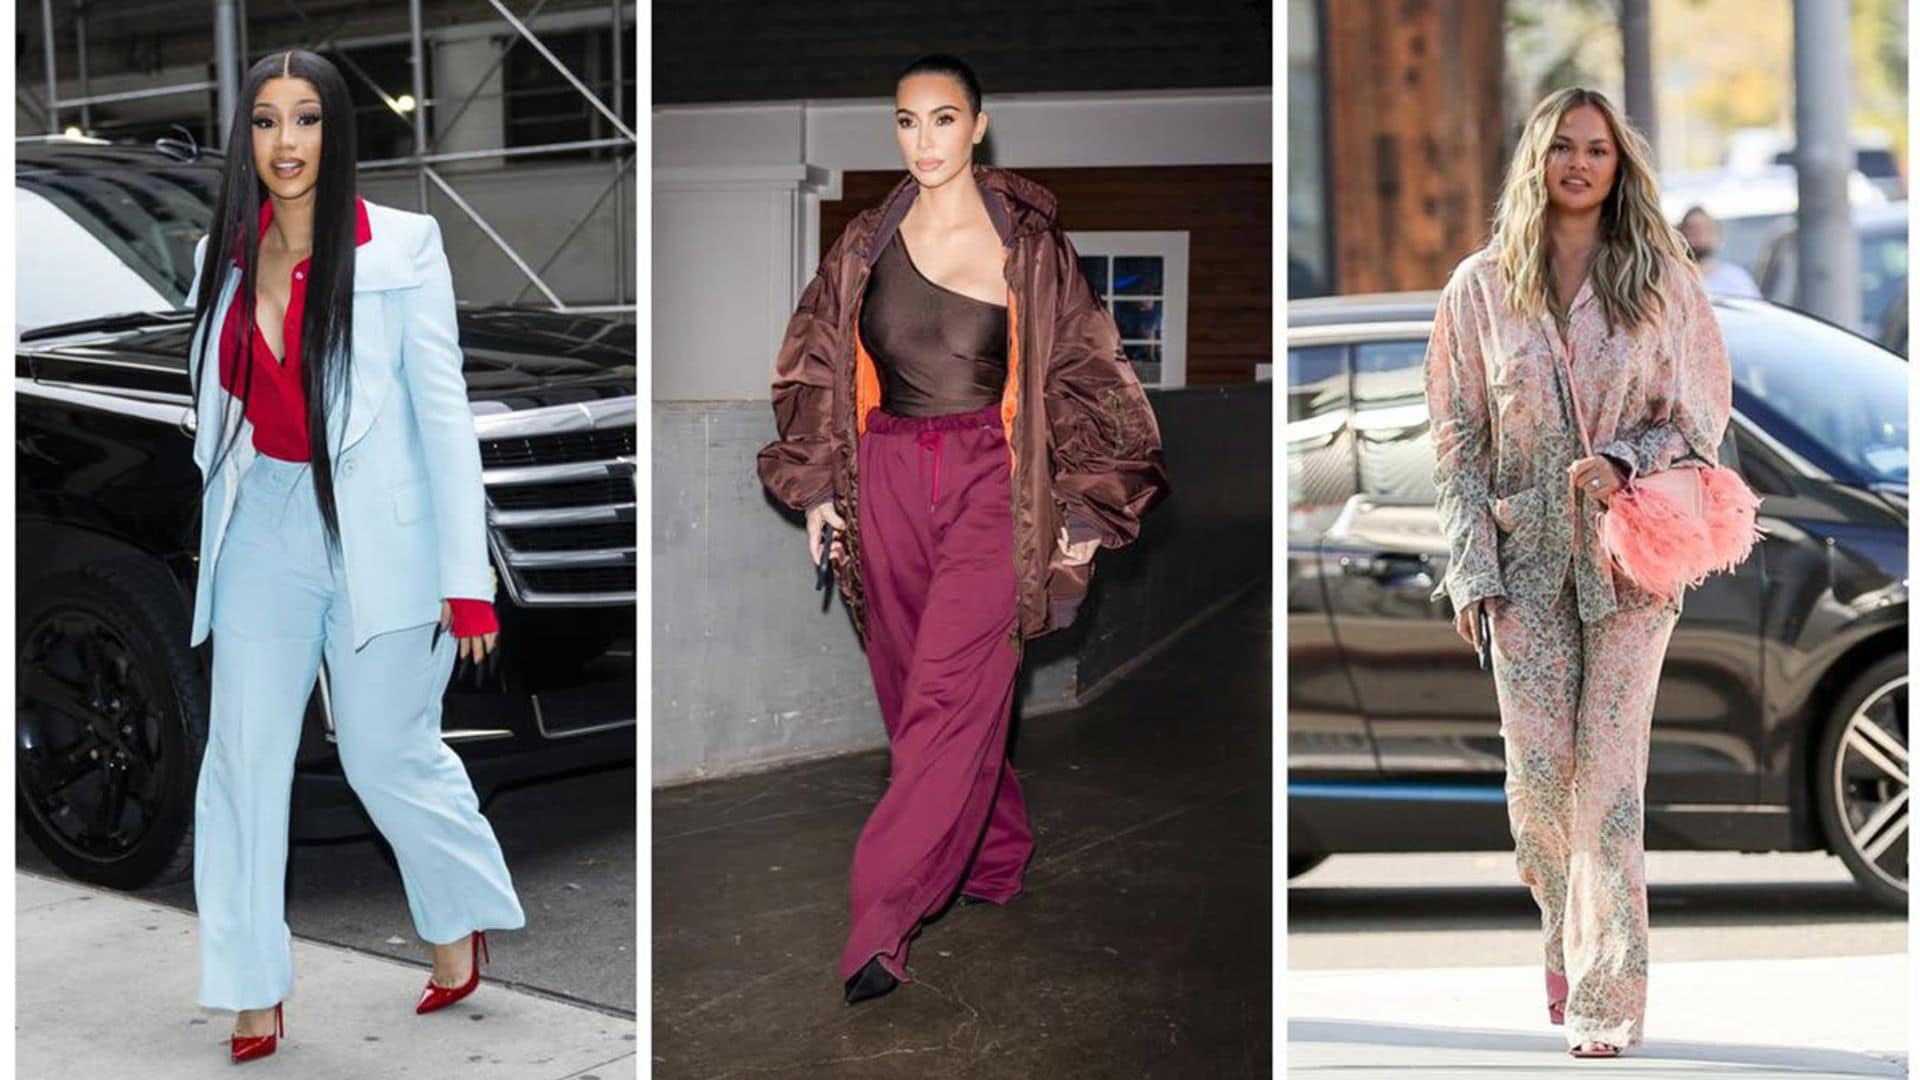 The Top 10 Celebrity Style Looks of the Week - November 5th